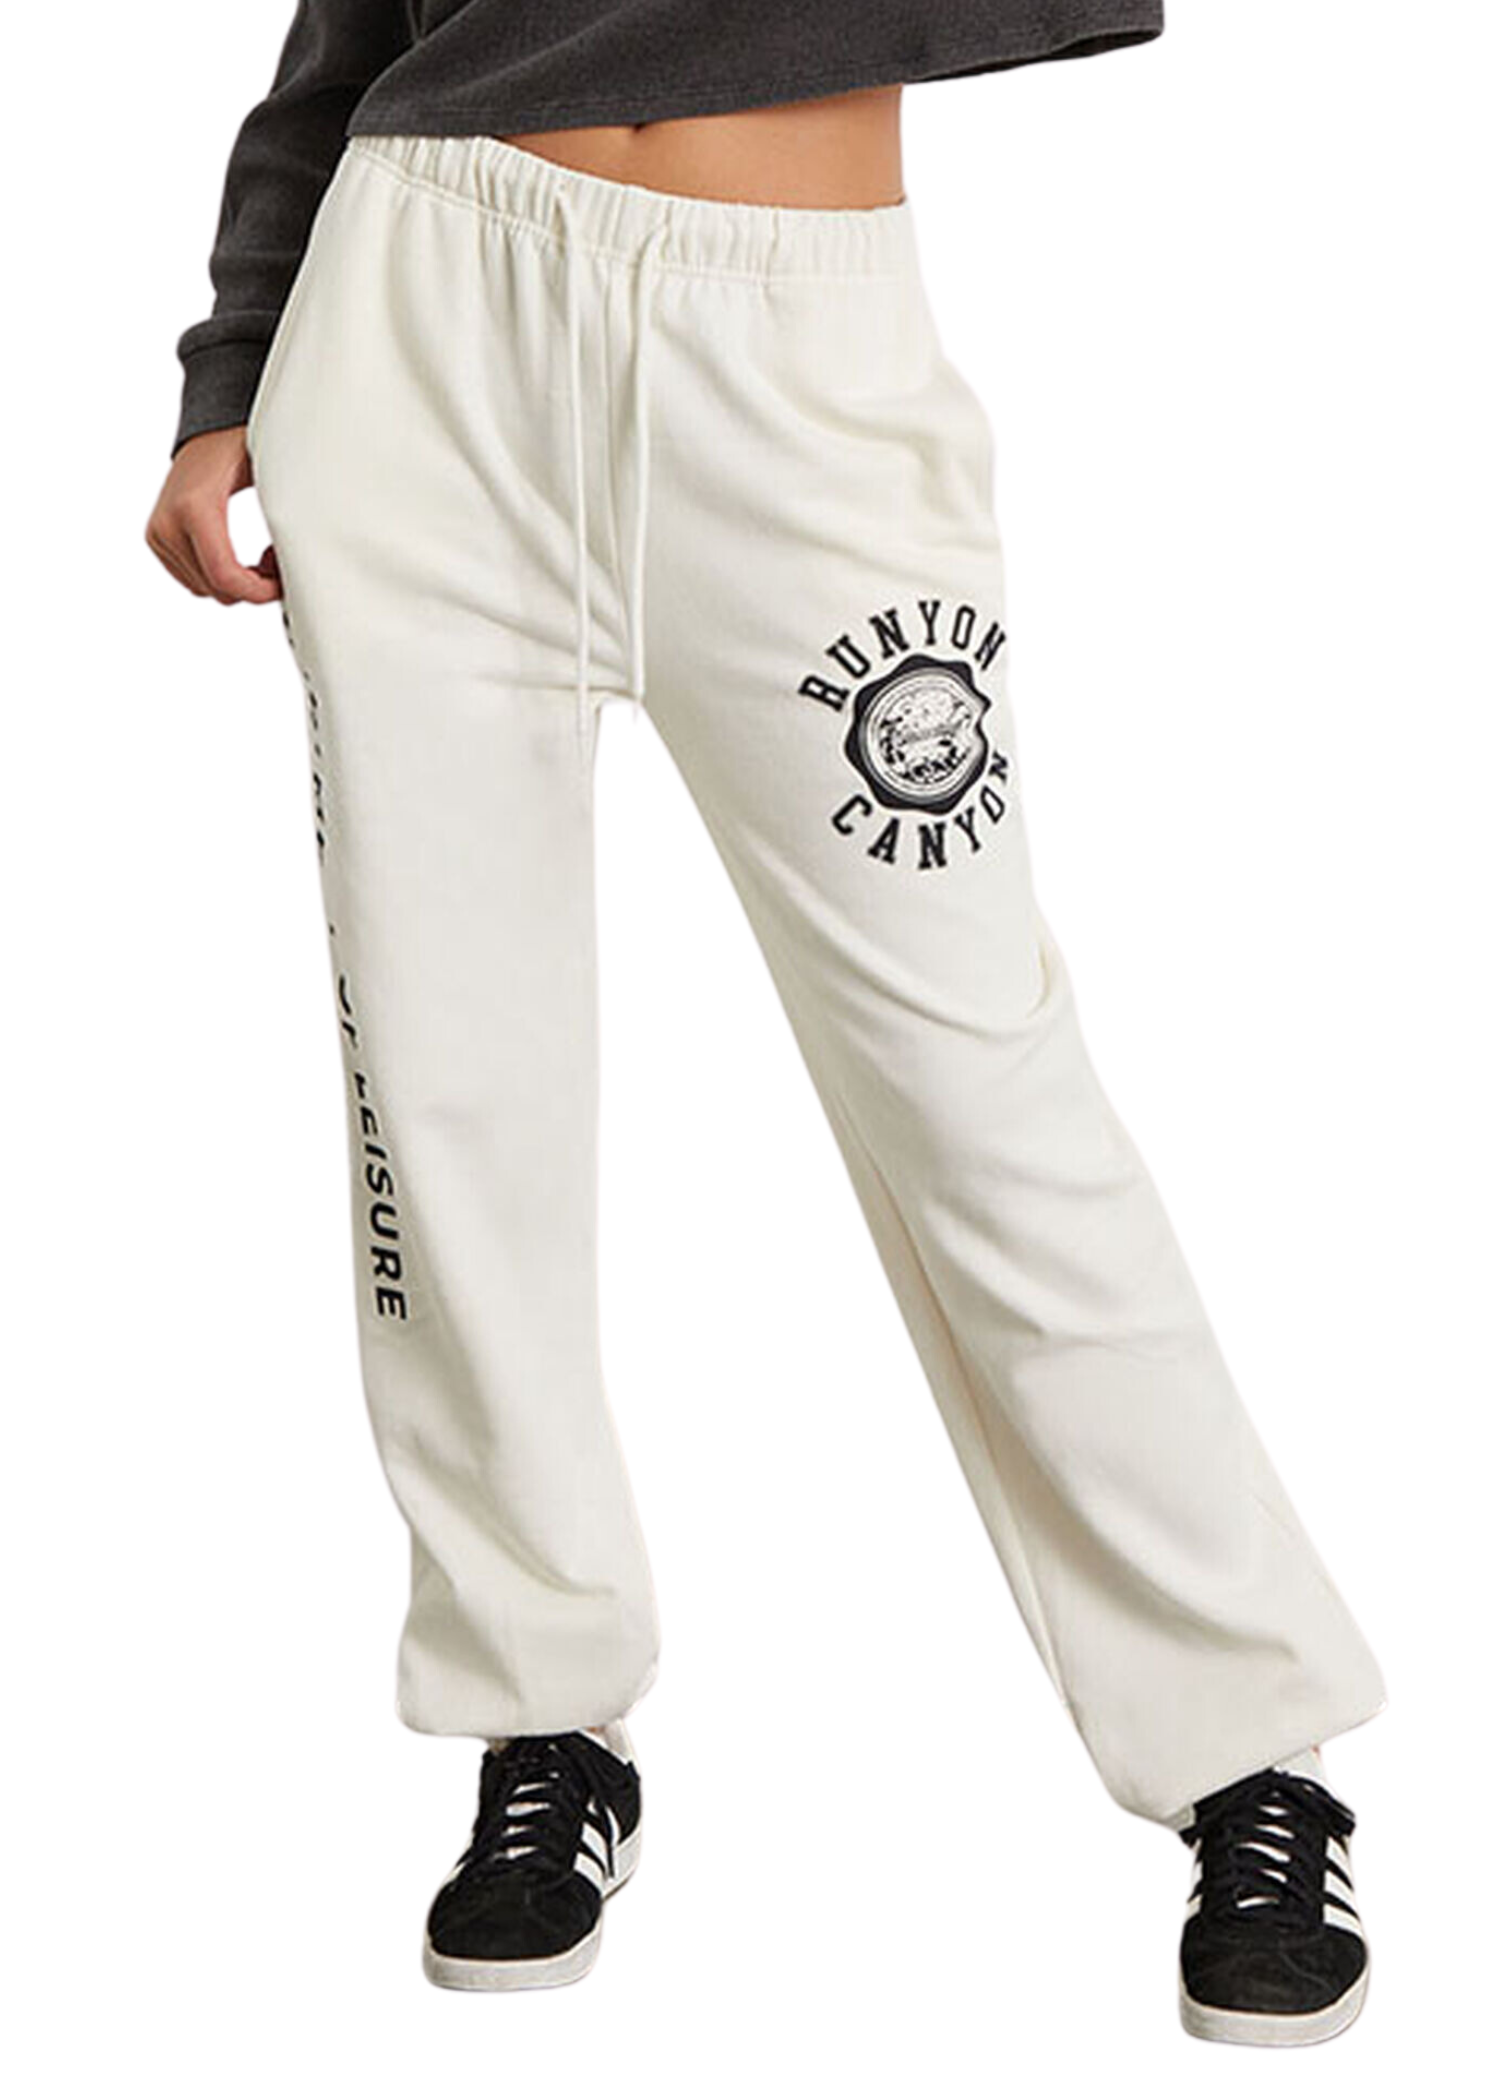 Runyon Canyon Department of Leisure Graphic Sweatpants – Coney Island Picnic